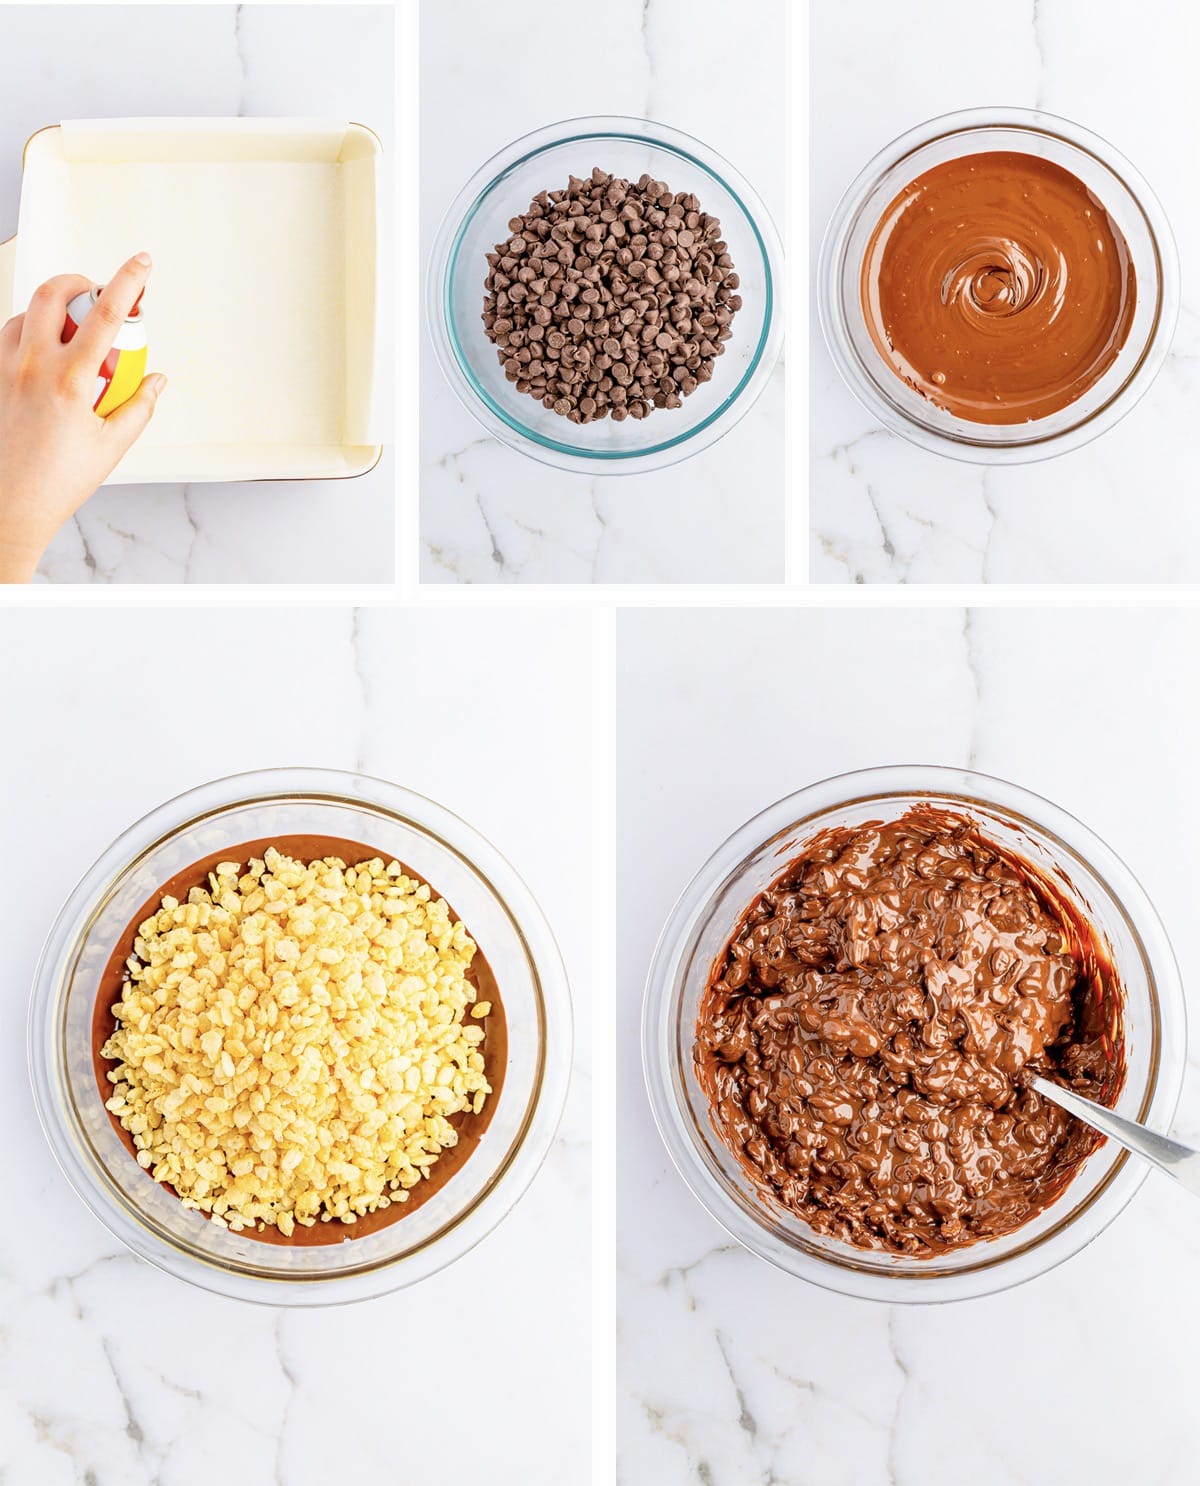 Overhead collage of images showing how to make nestle crunch